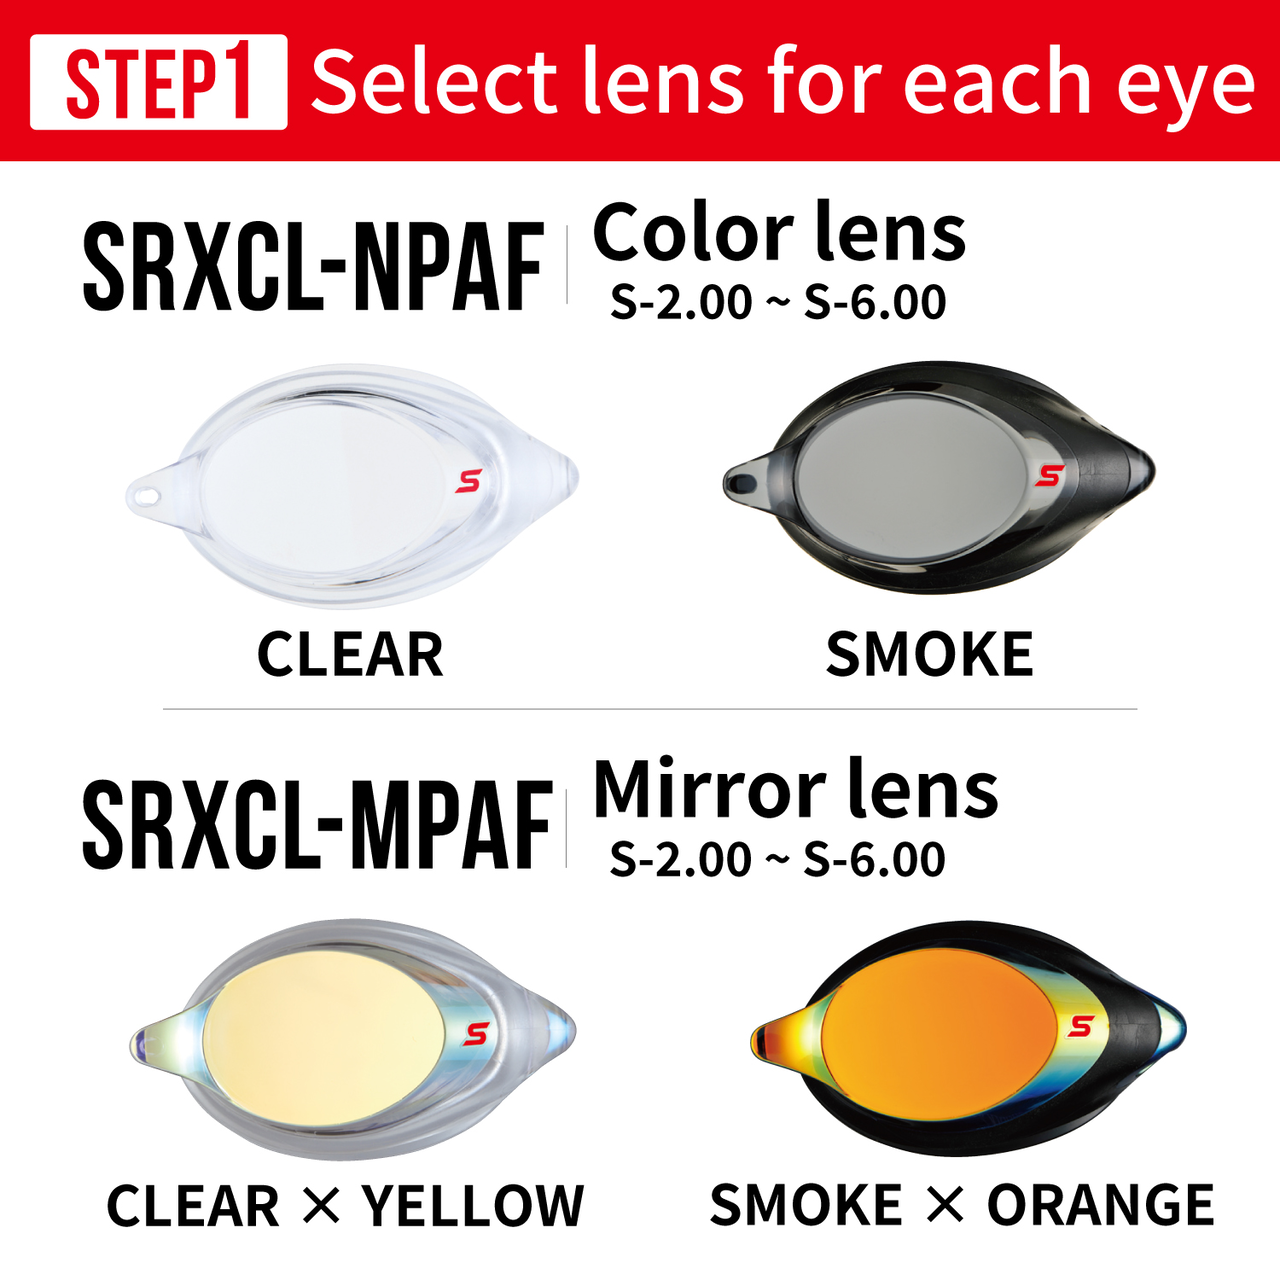 SRXCL-M PAF S-7.00 Clear x Yellow Mirror,Opt1, large image number 1